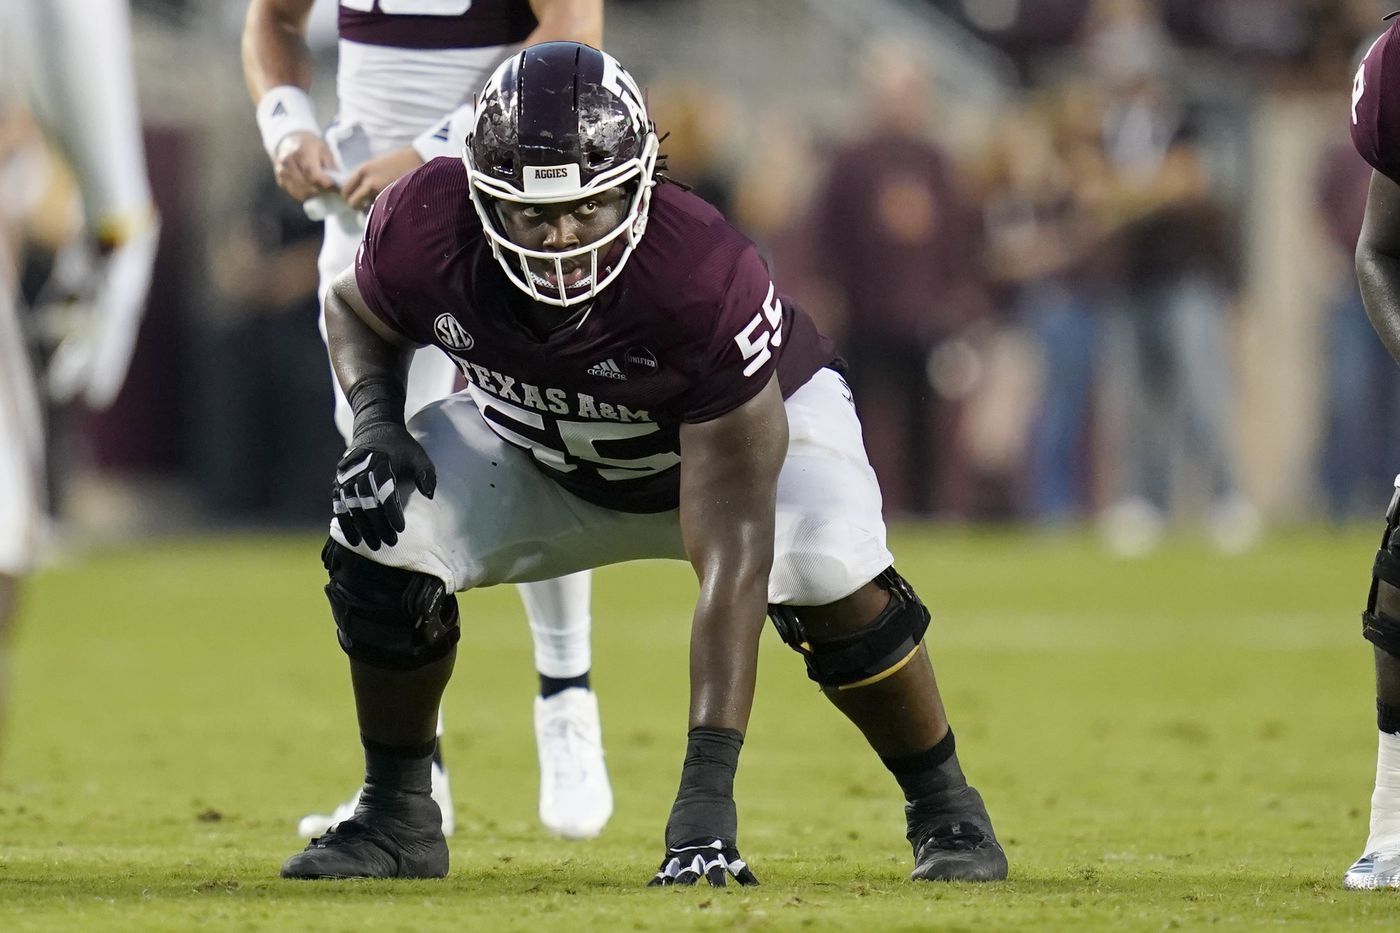 Texas A&M offensive lineman Kenyon Green (55) sets up in his stance before a play against Mississippi State during the first half, Oct. 2, 2021, in College Station, Texas.